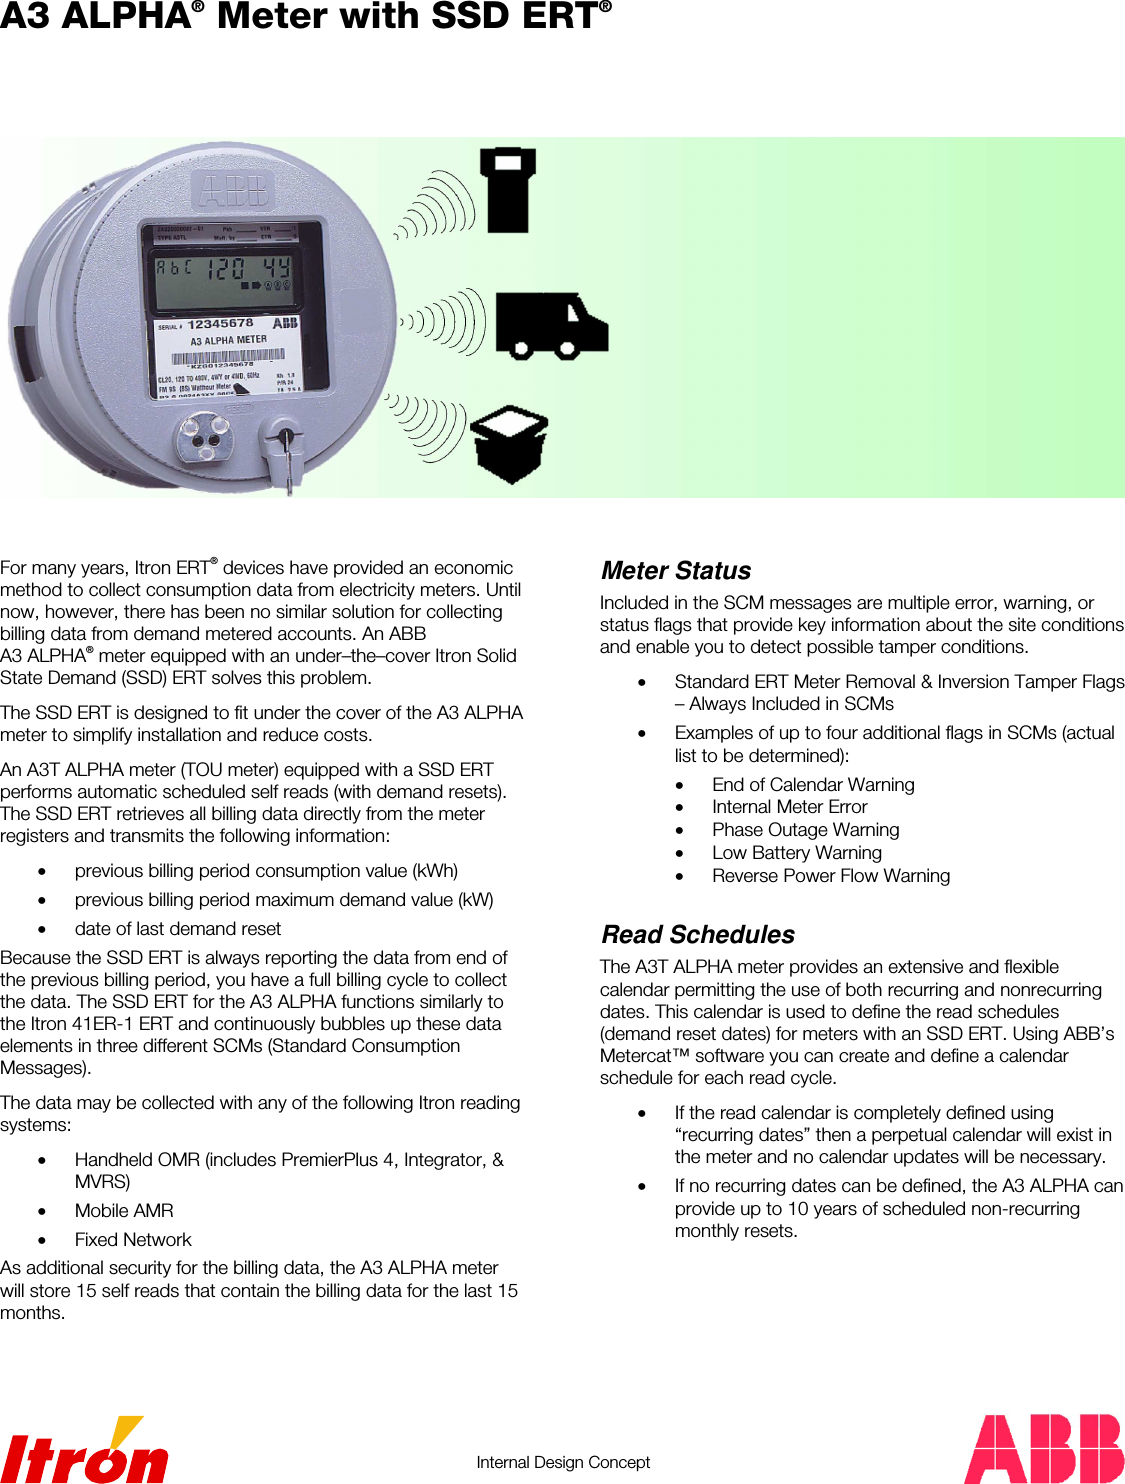   Internal Design Concept   A3 ALPHA® Meter with SSD ERT®    For many years, Itron ERT® devices have provided an economic method to collect consumption data from electricity meters. Until now, however, there has been no similar solution for collecting billing data from demand metered accounts. An ABB A3 ALPHA® meter equipped with an under–the–cover Itron Solid State Demand (SSD) ERT solves this problem. The SSD ERT is designed to fit under the cover of the A3 ALPHA meter to simplify installation and reduce costs. An A3T ALPHA meter (TOU meter) equipped with a SSD ERT performs automatic scheduled self reads (with demand resets). The SSD ERT retrieves all billing data directly from the meter registers and transmits the following information: •  previous billing period consumption value (kWh) •  previous billing period maximum demand value (kW) •  date of last demand reset Because the SSD ERT is always reporting the data from end of the previous billing period, you have a full billing cycle to collect the data. The SSD ERT for the A3 ALPHA functions similarly to the Itron 41ER-1 ERT and continuously bubbles up these data elements in three different SCMs (Standard Consumption Messages). The data may be collected with any of the following Itron reading systems: •  Handheld OMR (includes PremierPlus 4, Integrator, &amp; MVRS) •  Mobile AMR •  Fixed Network As additional security for the billing data, the A3 ALPHA meter will store 15 self reads that contain the billing data for the last 15 months.    Meter Status Included in the SCM messages are multiple error, warning, or status flags that provide key information about the site conditions and enable you to detect possible tamper conditions. •  Standard ERT Meter Removal &amp; Inversion Tamper Flags – Always Included in SCMs •  Examples of up to four additional flags in SCMs (actual list to be determined): •  End of Calendar Warning •  Internal Meter Error •  Phase Outage Warning •  Low Battery Warning •  Reverse Power Flow Warning  Read Schedules The A3T ALPHA meter provides an extensive and flexible calendar permitting the use of both recurring and nonrecurring dates. This calendar is used to define the read schedules (demand reset dates) for meters with an SSD ERT. Using ABB’s Metercat™ software you can create and define a calendar schedule for each read cycle. •  If the read calendar is completely defined using “recurring dates” then a perpetual calendar will exist in the meter and no calendar updates will be necessary. •  If no recurring dates can be defined, the A3 ALPHA can provide up to 10 years of scheduled non-recurring monthly resets.     